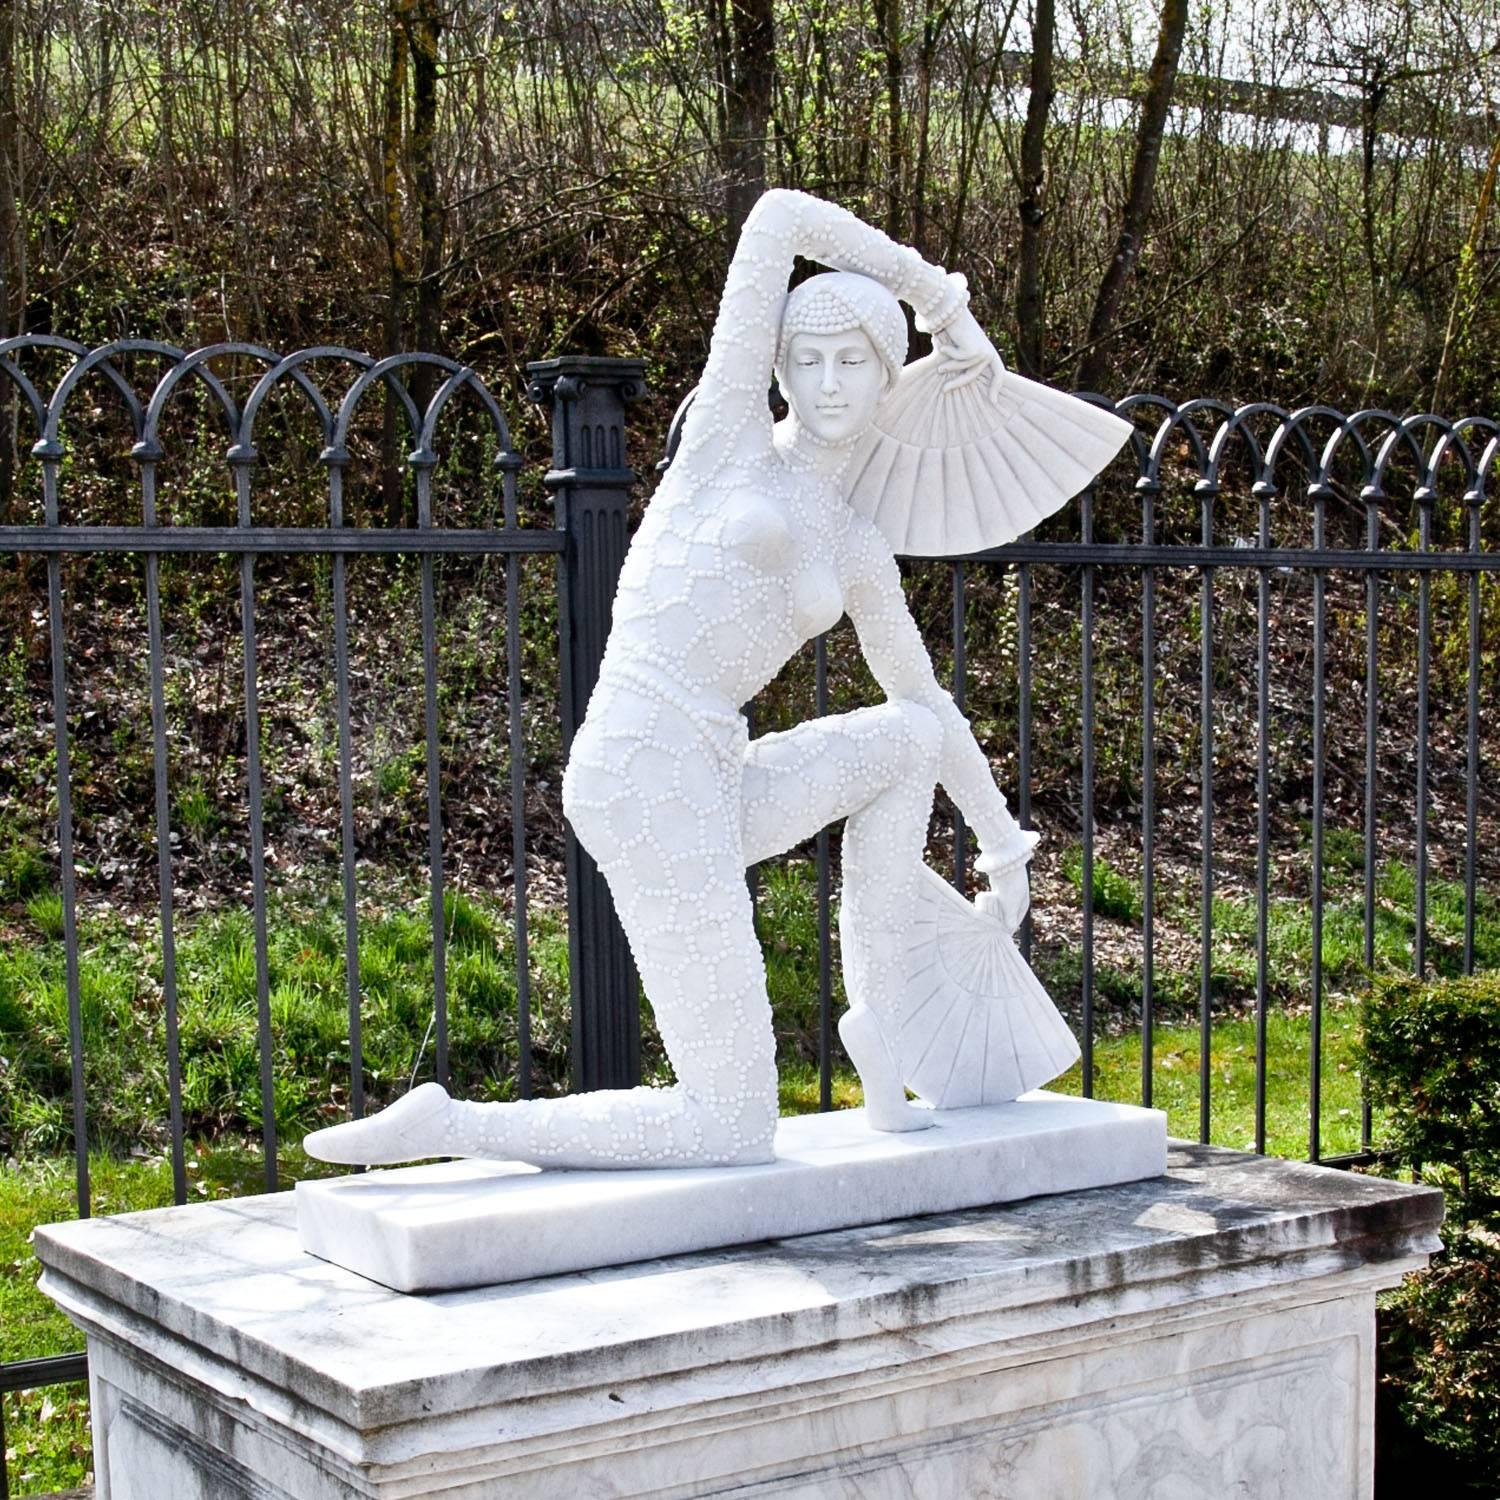 Contemporary Marble Sculpture of an Art Deco-Style Dancer, 21st Century